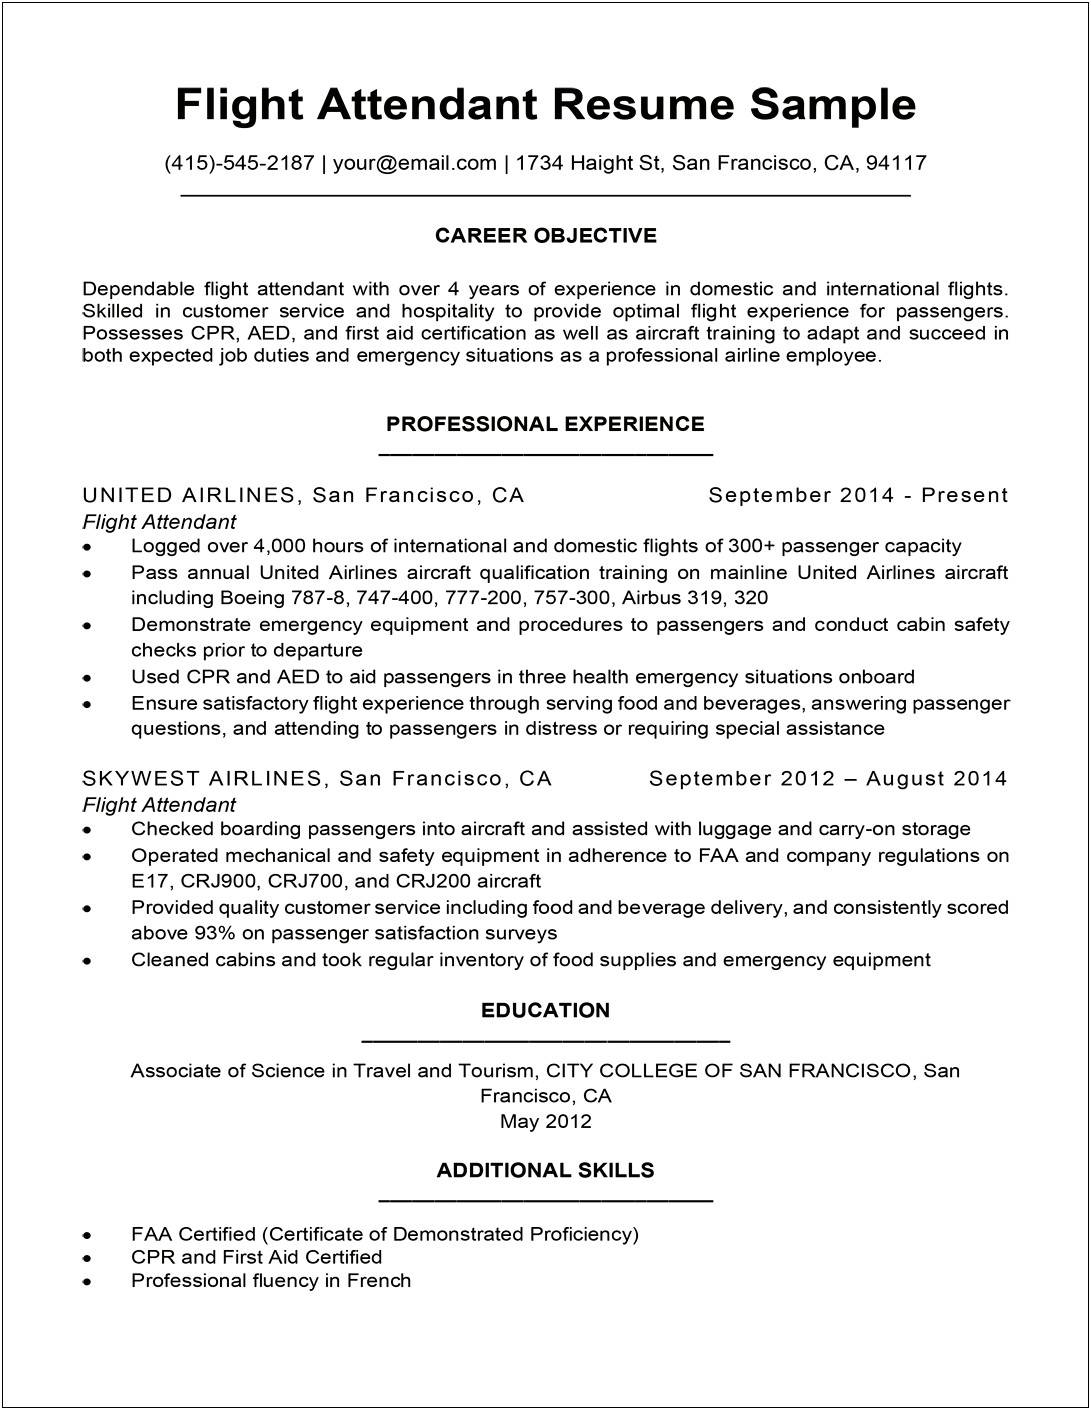 Resume Examples For Travel Industry